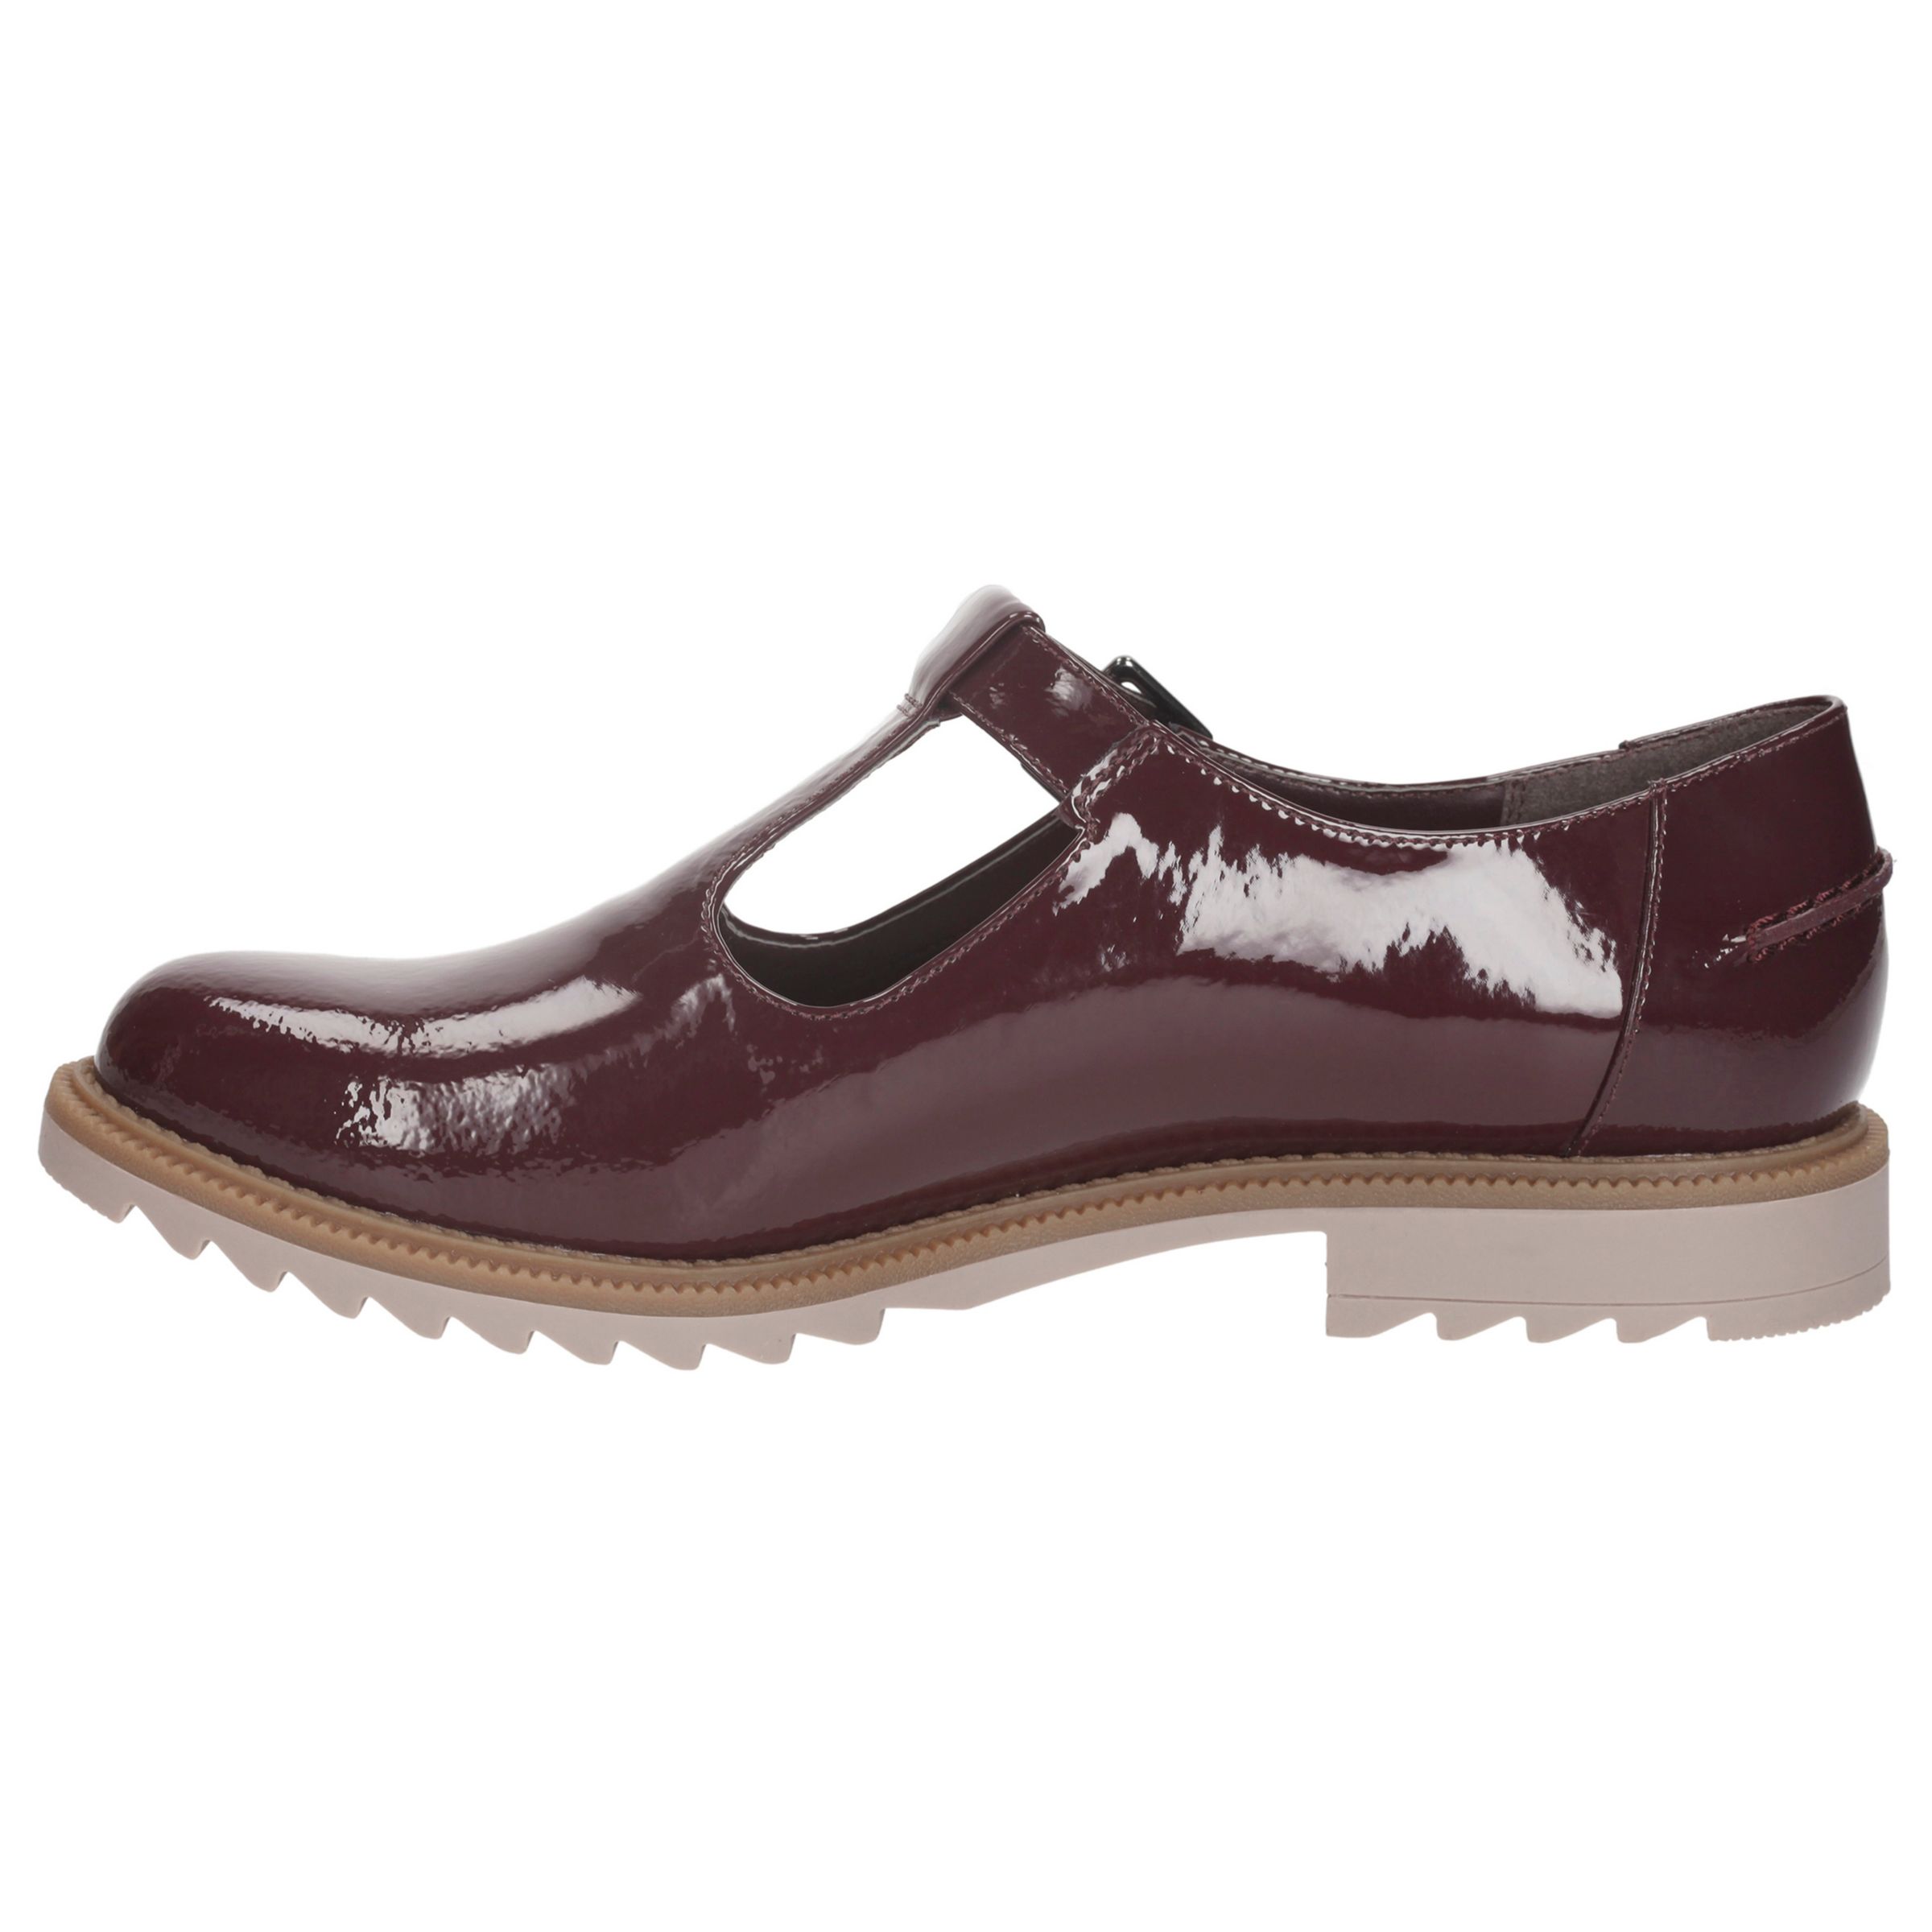 clarks burgundy patent shoes